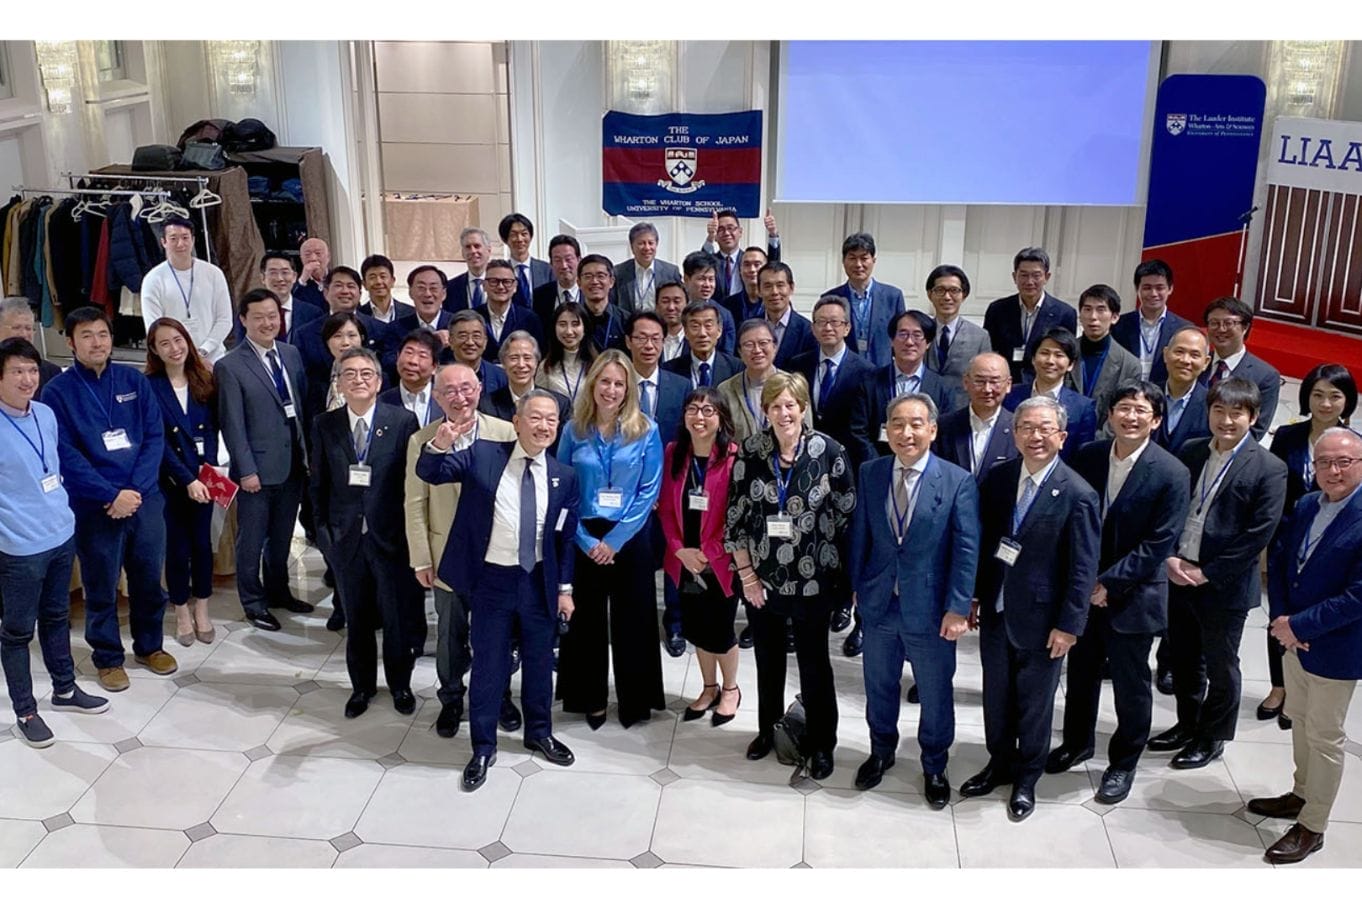 Members of the Wharton Club of Japan and leaders from the Lauder Institute pose for a wide group shot.